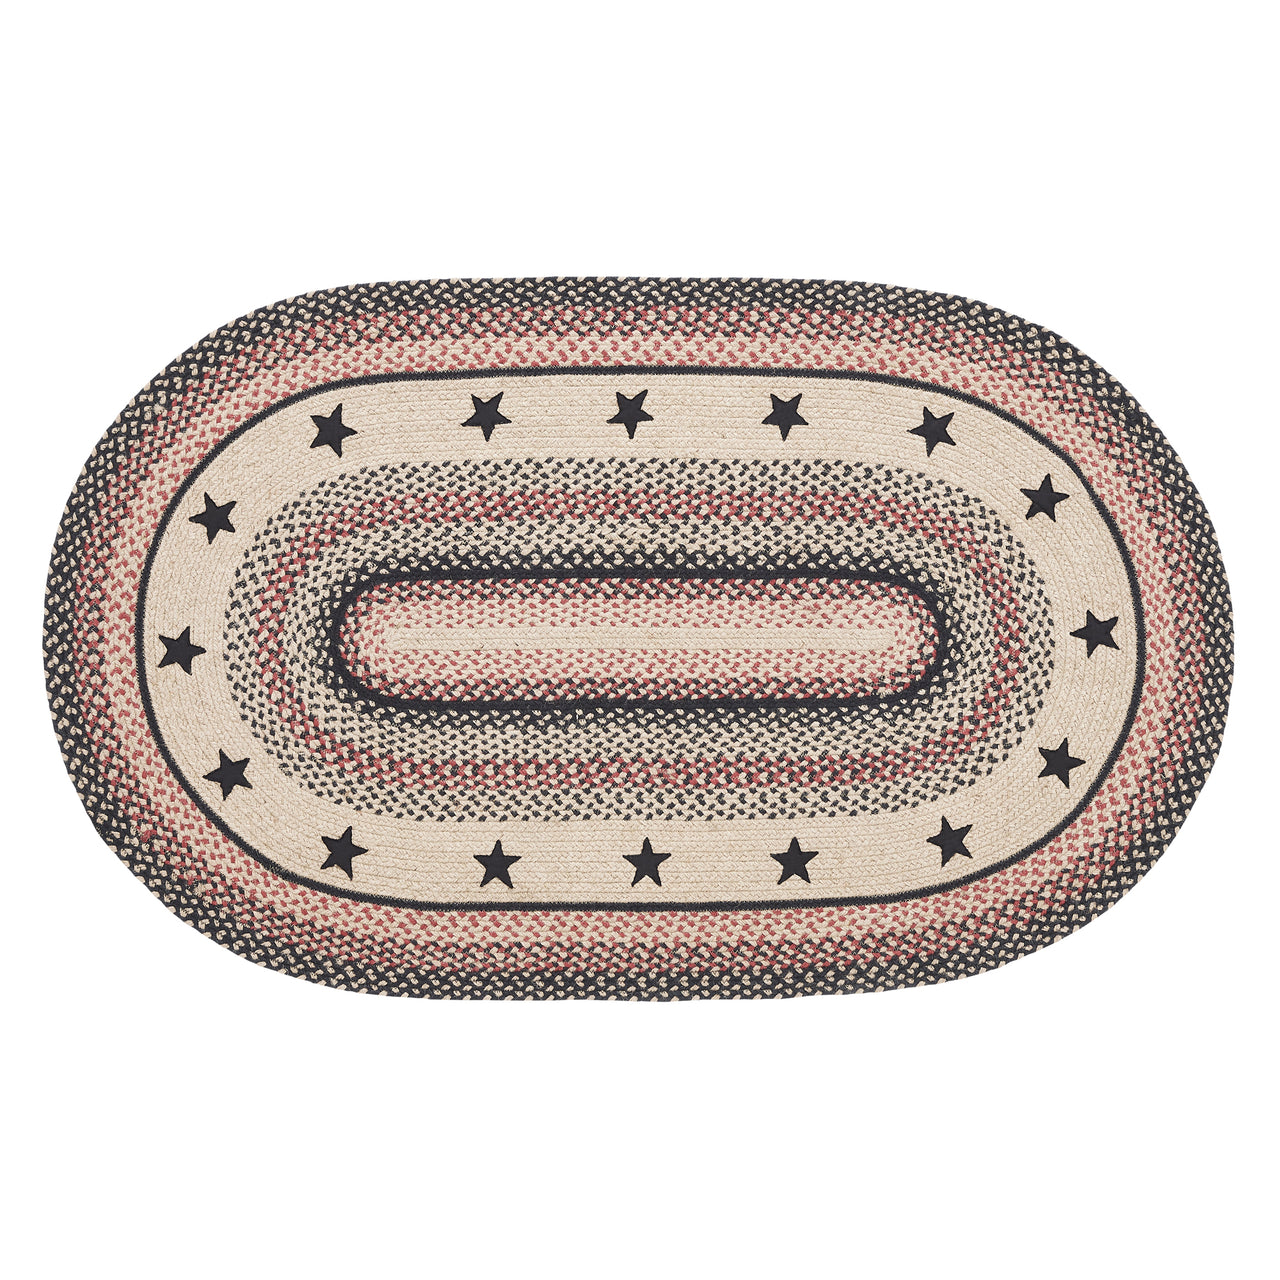 Colonial Star Jute Braided Rug Oval with Rug Pad 3'x5' VHC Brands